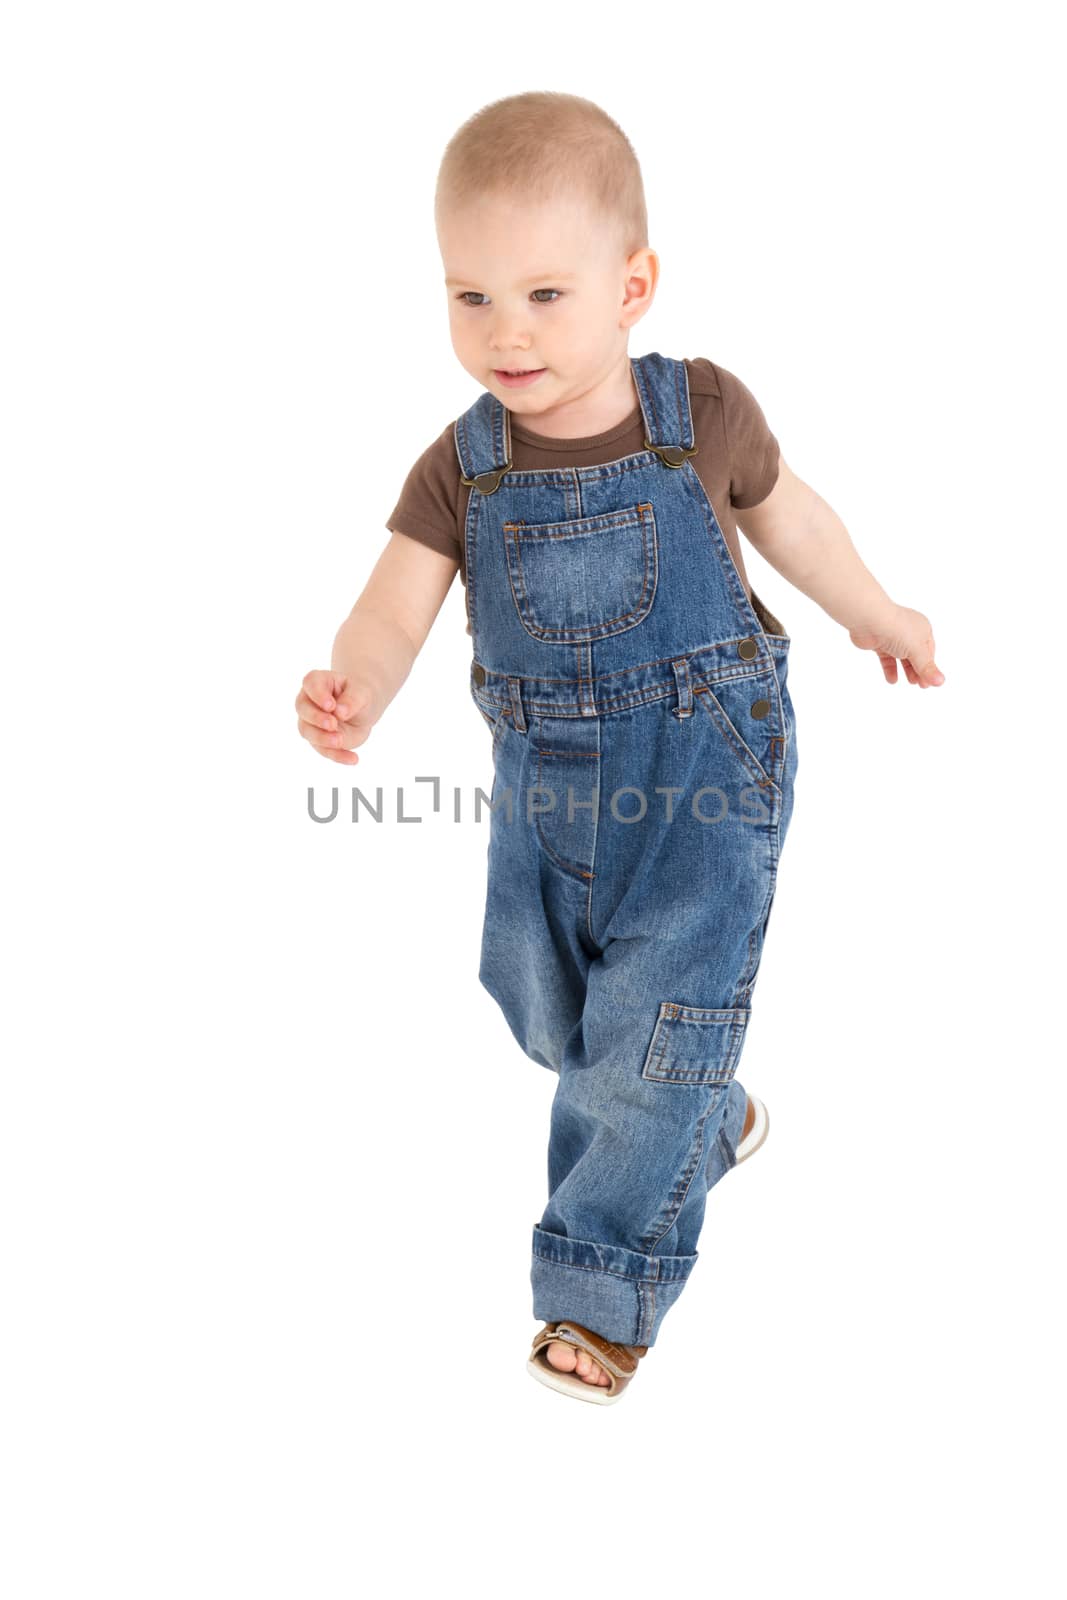 child running in casual clothes on a white background